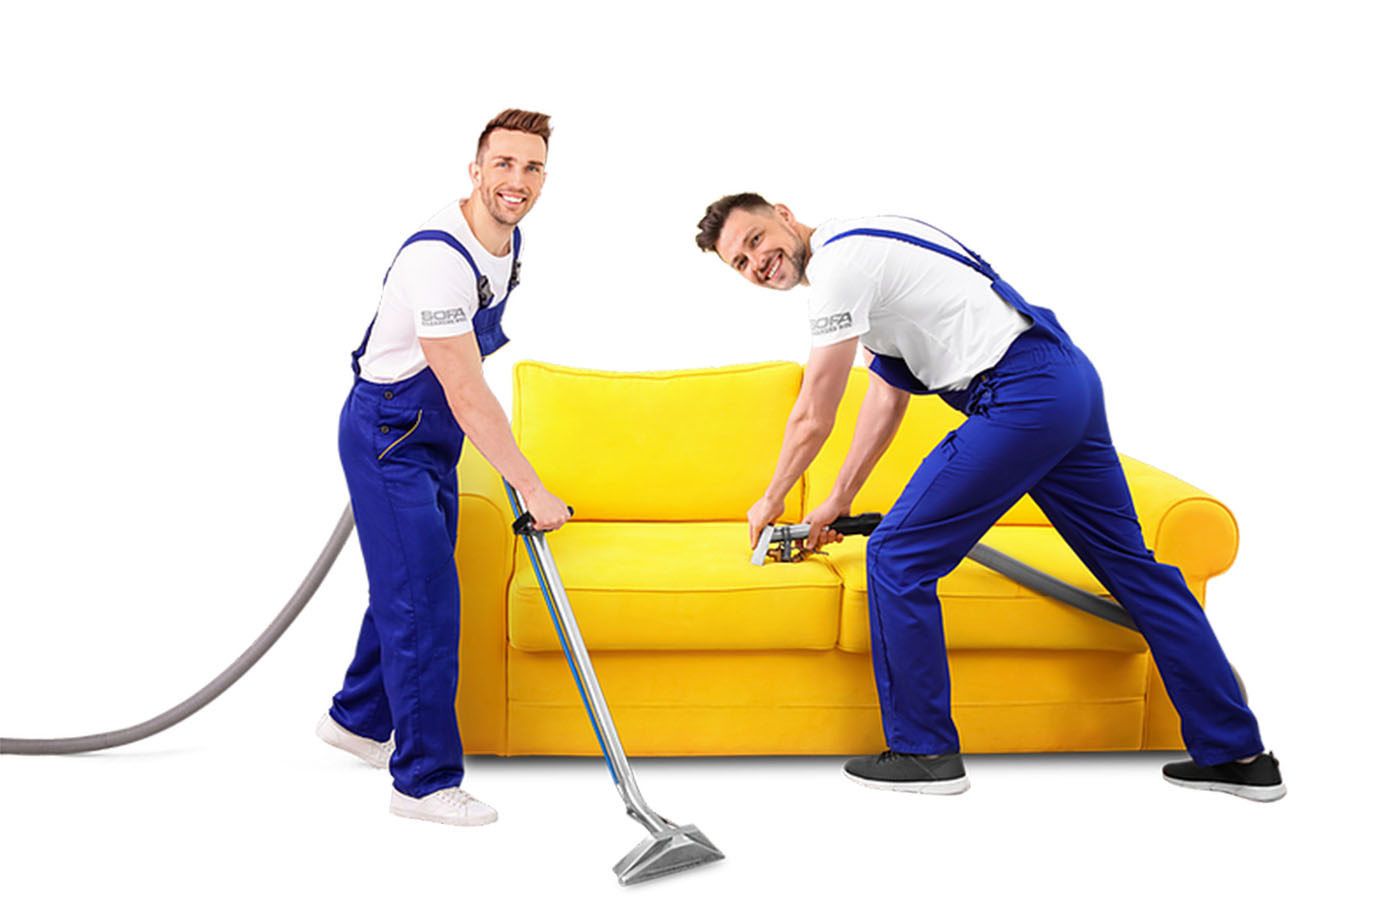 Furniture and carpet cleaning in NYC